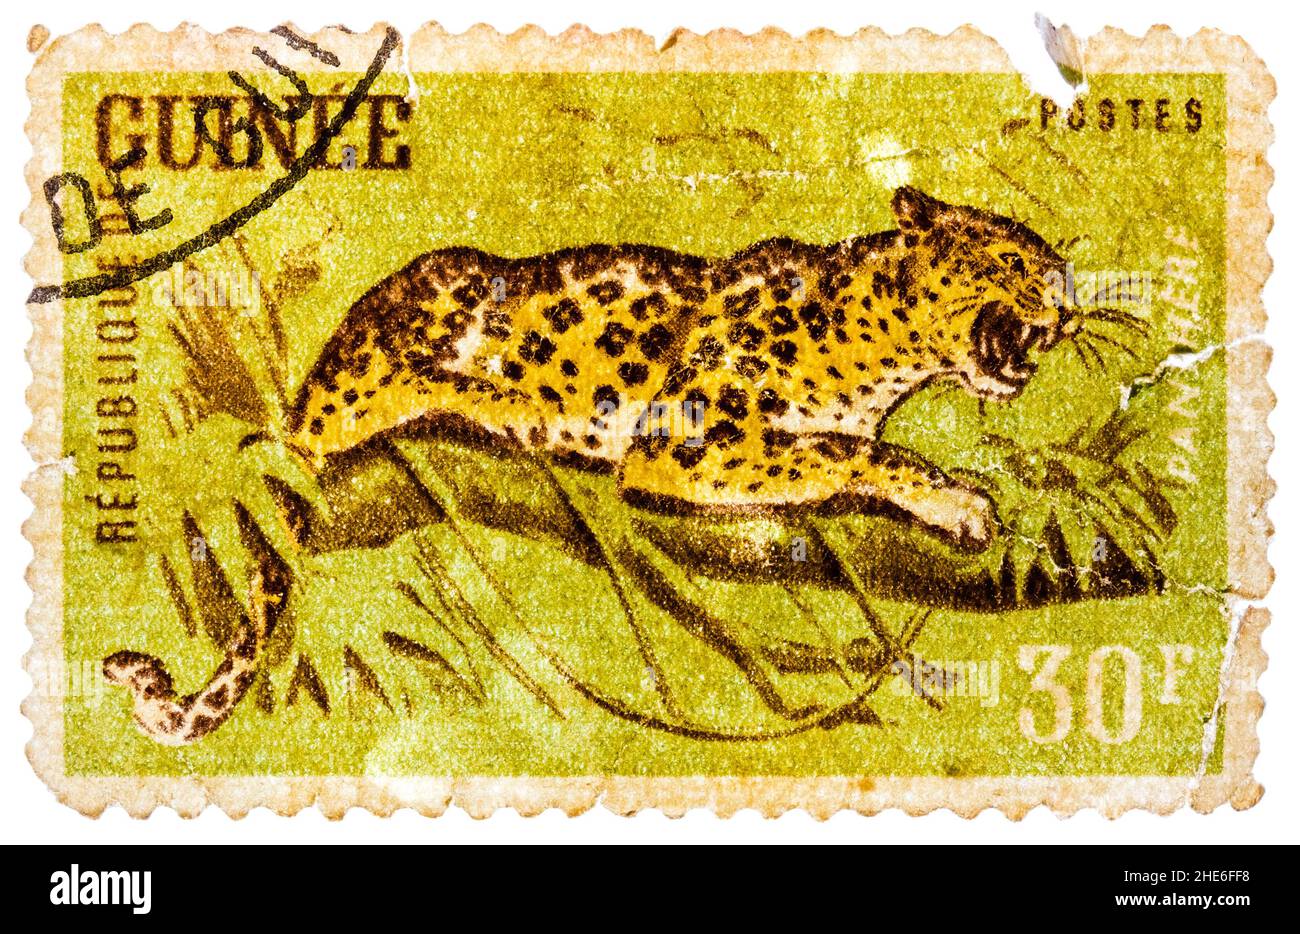 Stamp printed in Guinea from the "Wild Animals" issue shows a Leopard (Panthera pardus) Stock Photo